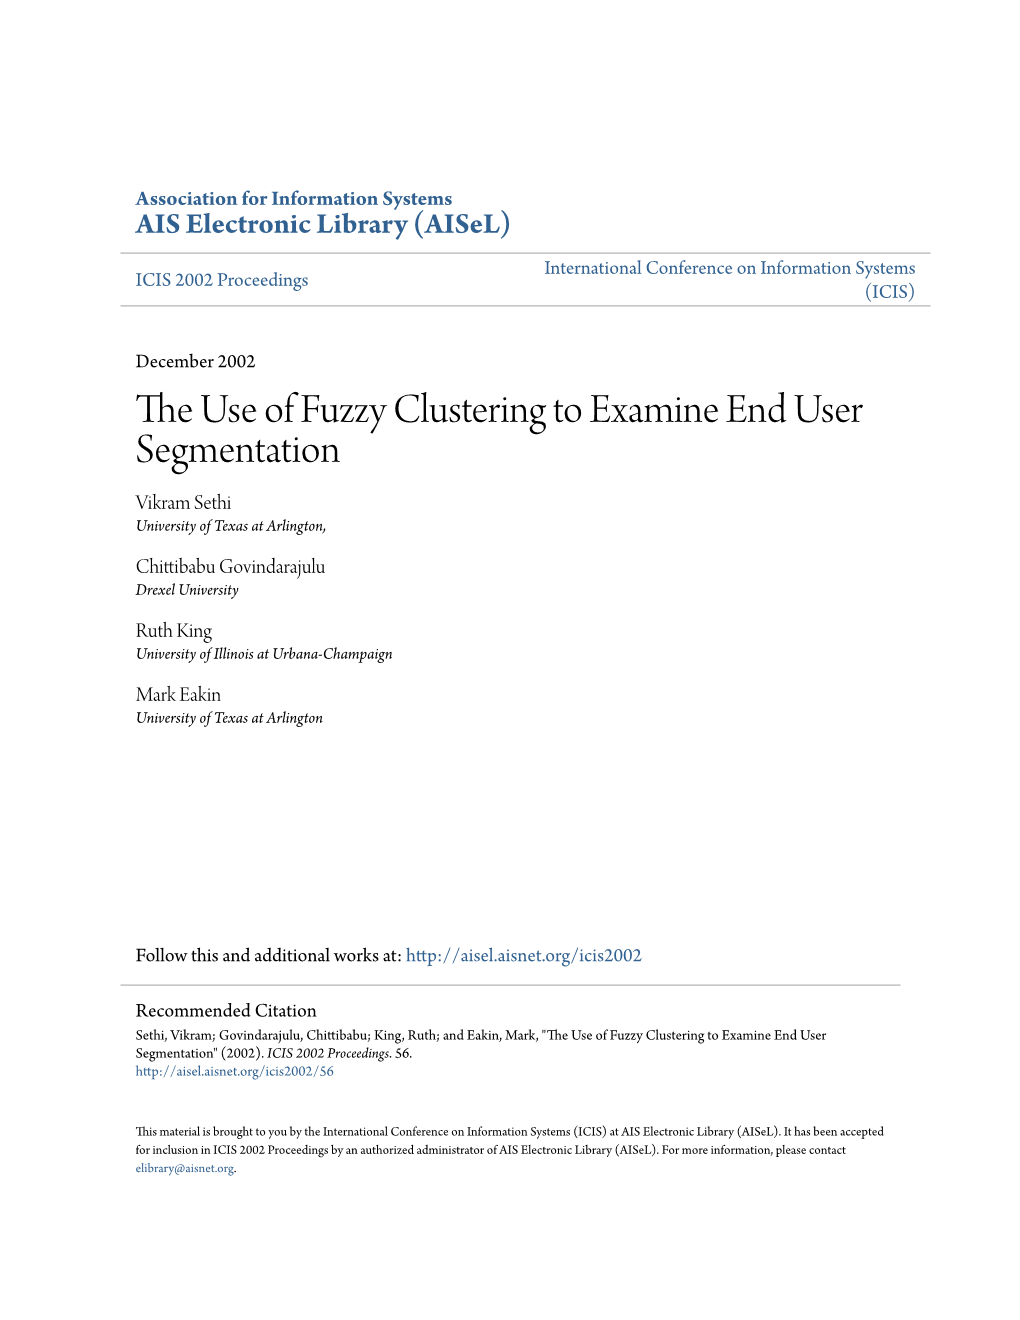 The Use of Fuzzy Clustering to Examine End User Segmentation